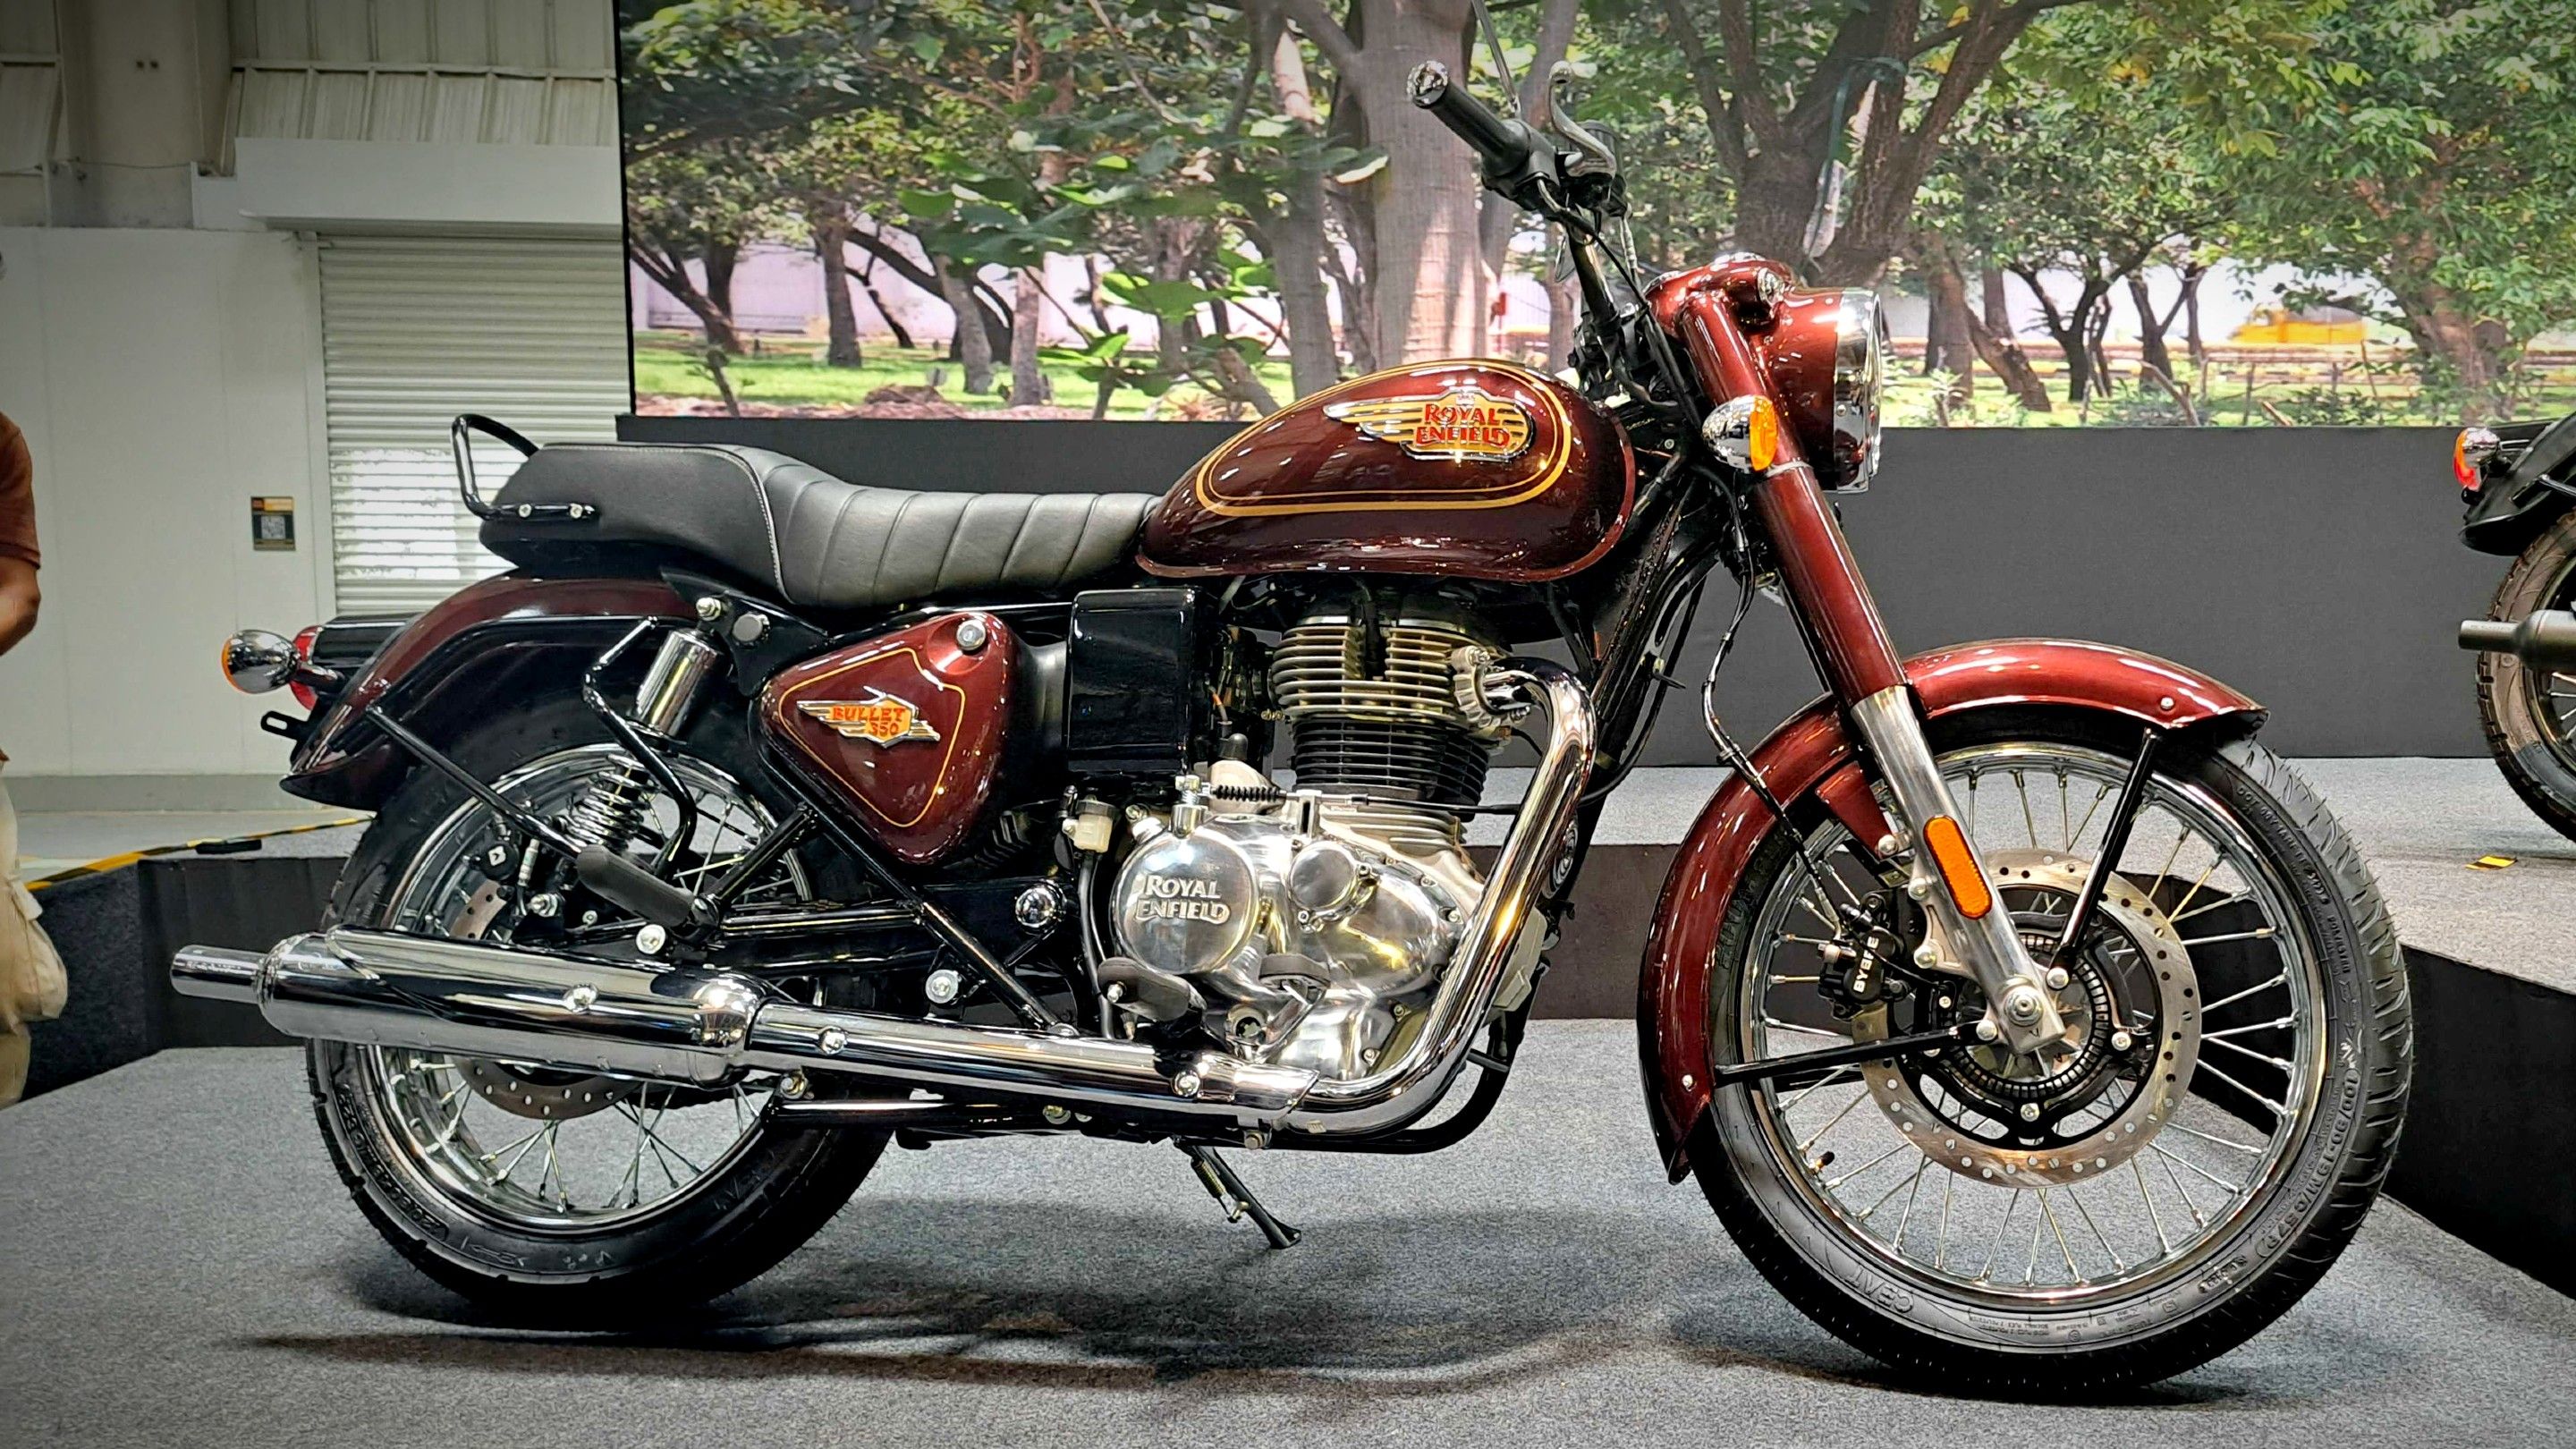 How The Royal Enfield Bullet Has Survived For 90 Years